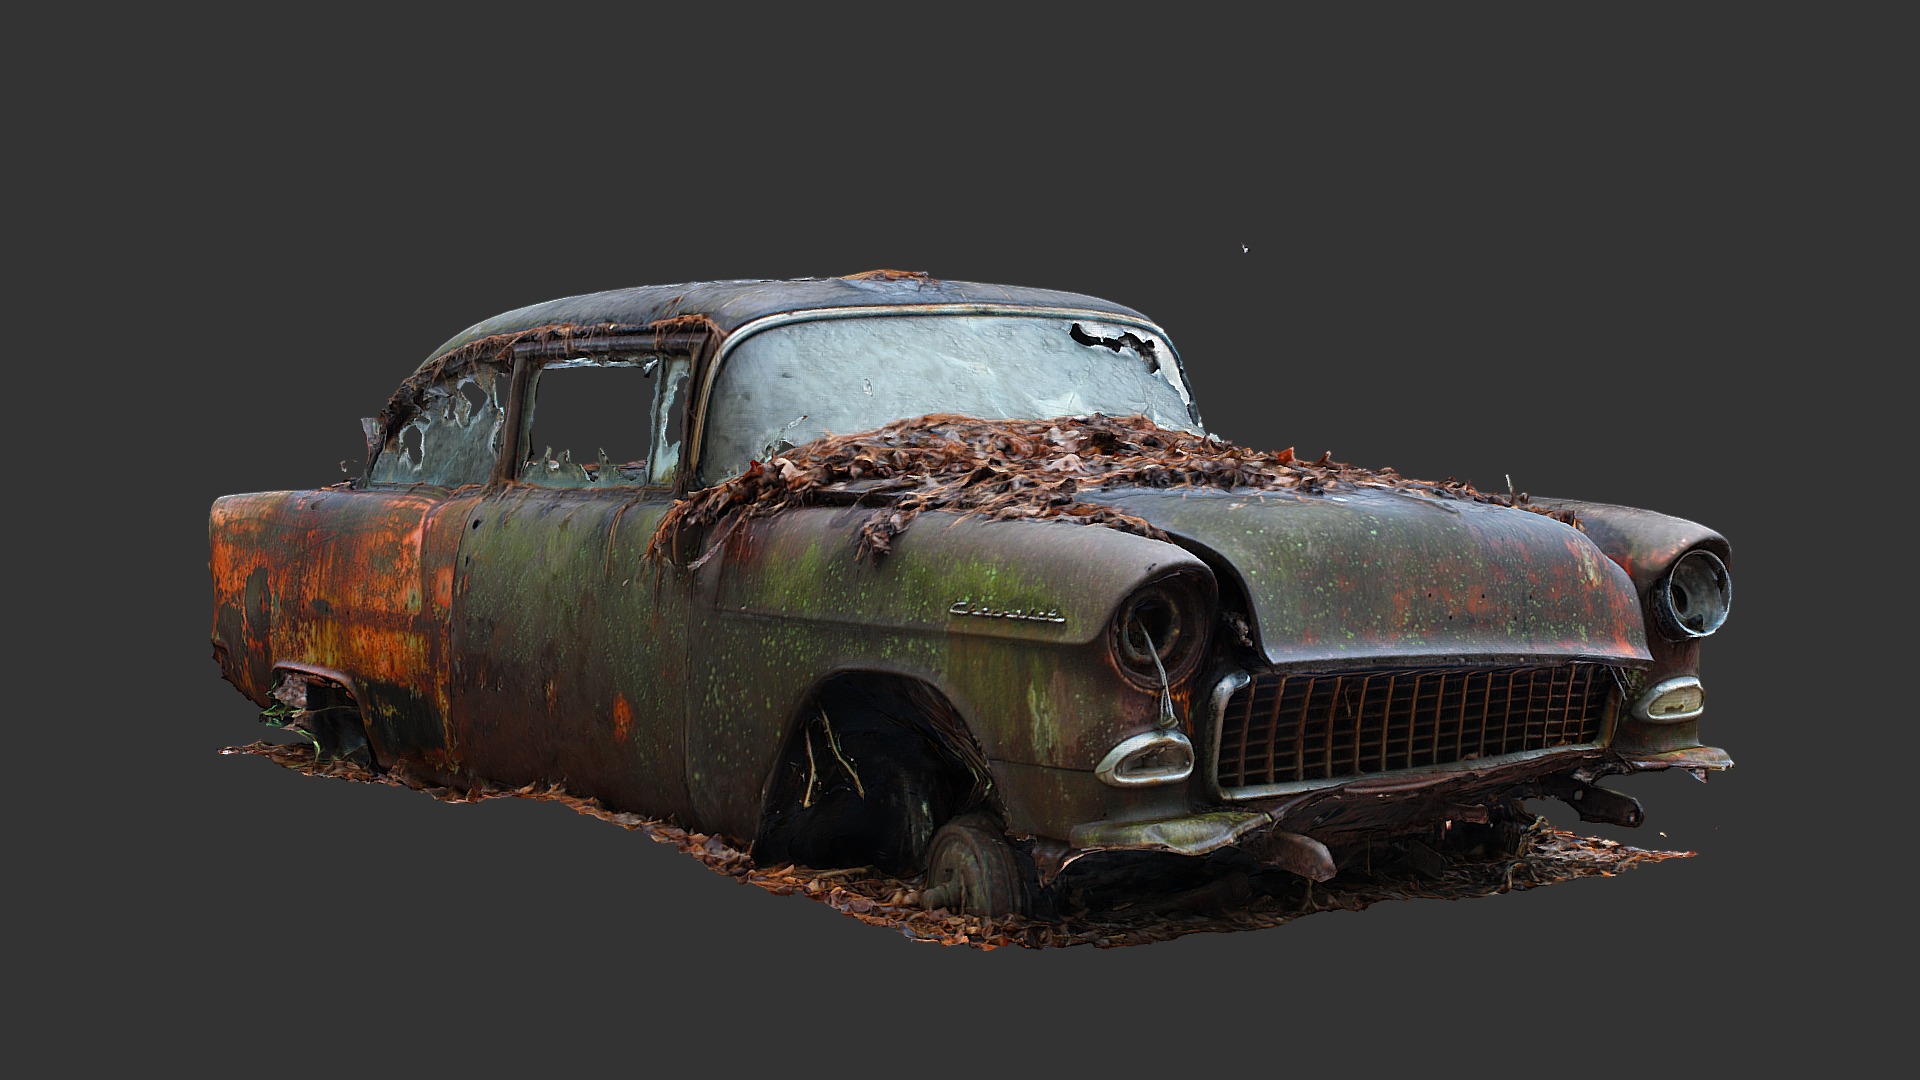 3D model 1950’s Gutted Car (Raw Scan) - This is a 3D model of the 1950's Gutted Car (Raw Scan). The 3D model is about a rusted out car.